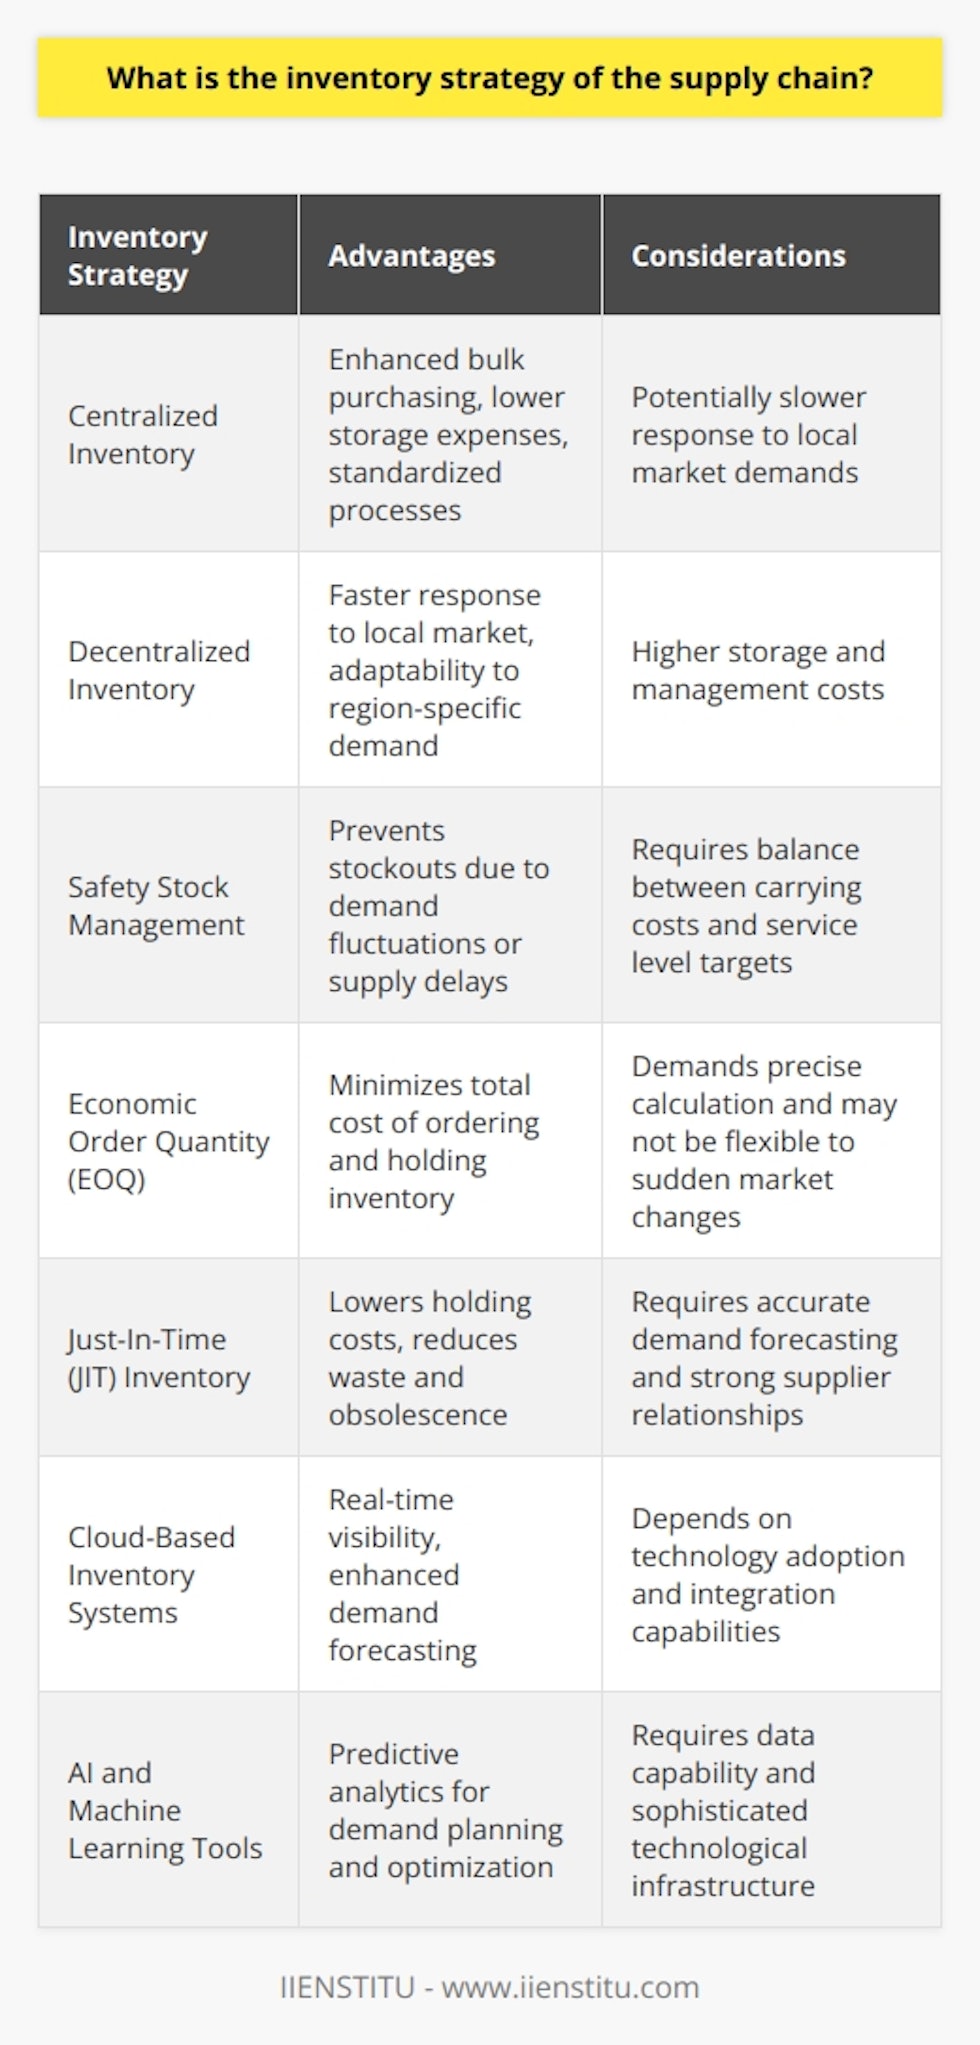 An efficient inventory strategy forms the cornerstone of a streamlined supply chain, enabling organizations to manage resources effectively while ensuring that products are available to meet consumer demand. Inventory management is critical as it impacts the supply chain's ability to provide high service levels, reduce costs, and adapt to market changes.In the supply chain context, inventory can be managed through different strategies, notably centralized and decentralized approaches. Centralization consolidates inventory in a single location, often a hub or a central warehouse, facilitating bulk purchasing, reducing storage expenses, and enabling standardized processes within the supply chain. Decentralization, on the other hand, disperses inventory across several locations, often closer to key markets or customers. This approach may increase storage and management costs but allows for quicker response times and adaptability to region-specific demand, which can be particularly beneficial in geographically diverse markets or where service speed is paramount.Another key aspect of inventory strategy is the management of safety stock, which is the additional inventory kept to prevent stockouts due to demand fluctuations or supply delays. Determining the right amount of safety stock involves careful analysis of demand patterns, lead times, and the costs of overstocking versus lost sales. By mastering this balance, organizations can maintain service level targets without excess expenditures on inventory carrying costs.Supply chains can also benefit from inventory optimization techniques. The Economic Order Quantity (EOQ) model is a classical mathematical formula that provides the optimal quantity to order, minimizing the total cost of ordering and holding inventory. In a JIT inventory system, materials are received just in time to enter the production process, which reduces inventory holding costs but requires precise coordination with suppliers and an accurate understanding of production schedules.Moreover, advancements in technology have significantly affected inventory management strategies. For instance, cloud-based inventory management systems offer real-time visibility into inventory levels across multiple locations, greatly enhancing the ability to manage stock efficiently. Real-time tracking reduces the risk of stockouts and overstock by providing up-to-date information that can be used for more accurate demand forecasting. In addition, sophisticated tools such as artificial intelligence (AI) and machine learning offer predictive analytics, which can inform more precise demand planning and inventory optimization. These advanced technologies can anticipate market trends and help in making proactive inventory management decisions, reducing the overall need for safety stock and minimizing waste due to overproduction or obsolescence.In conclusion, an effective inventory strategy in the supply chain requires a nuanced understanding of centralized versus decentralized approaches, safety stock levels, and the appropriate application of optimization techniques. Harnessing technological advancements also plays a critical role in refining these strategies. Supply chain managers must regularly review and adapt their inventory strategies to changing markets and technological landscapes, aiming to achieve the delicate balance between availability and cost-effectiveness. Thus, they ensure that their supply chains are both responsive to customer needs and maintain profitability.